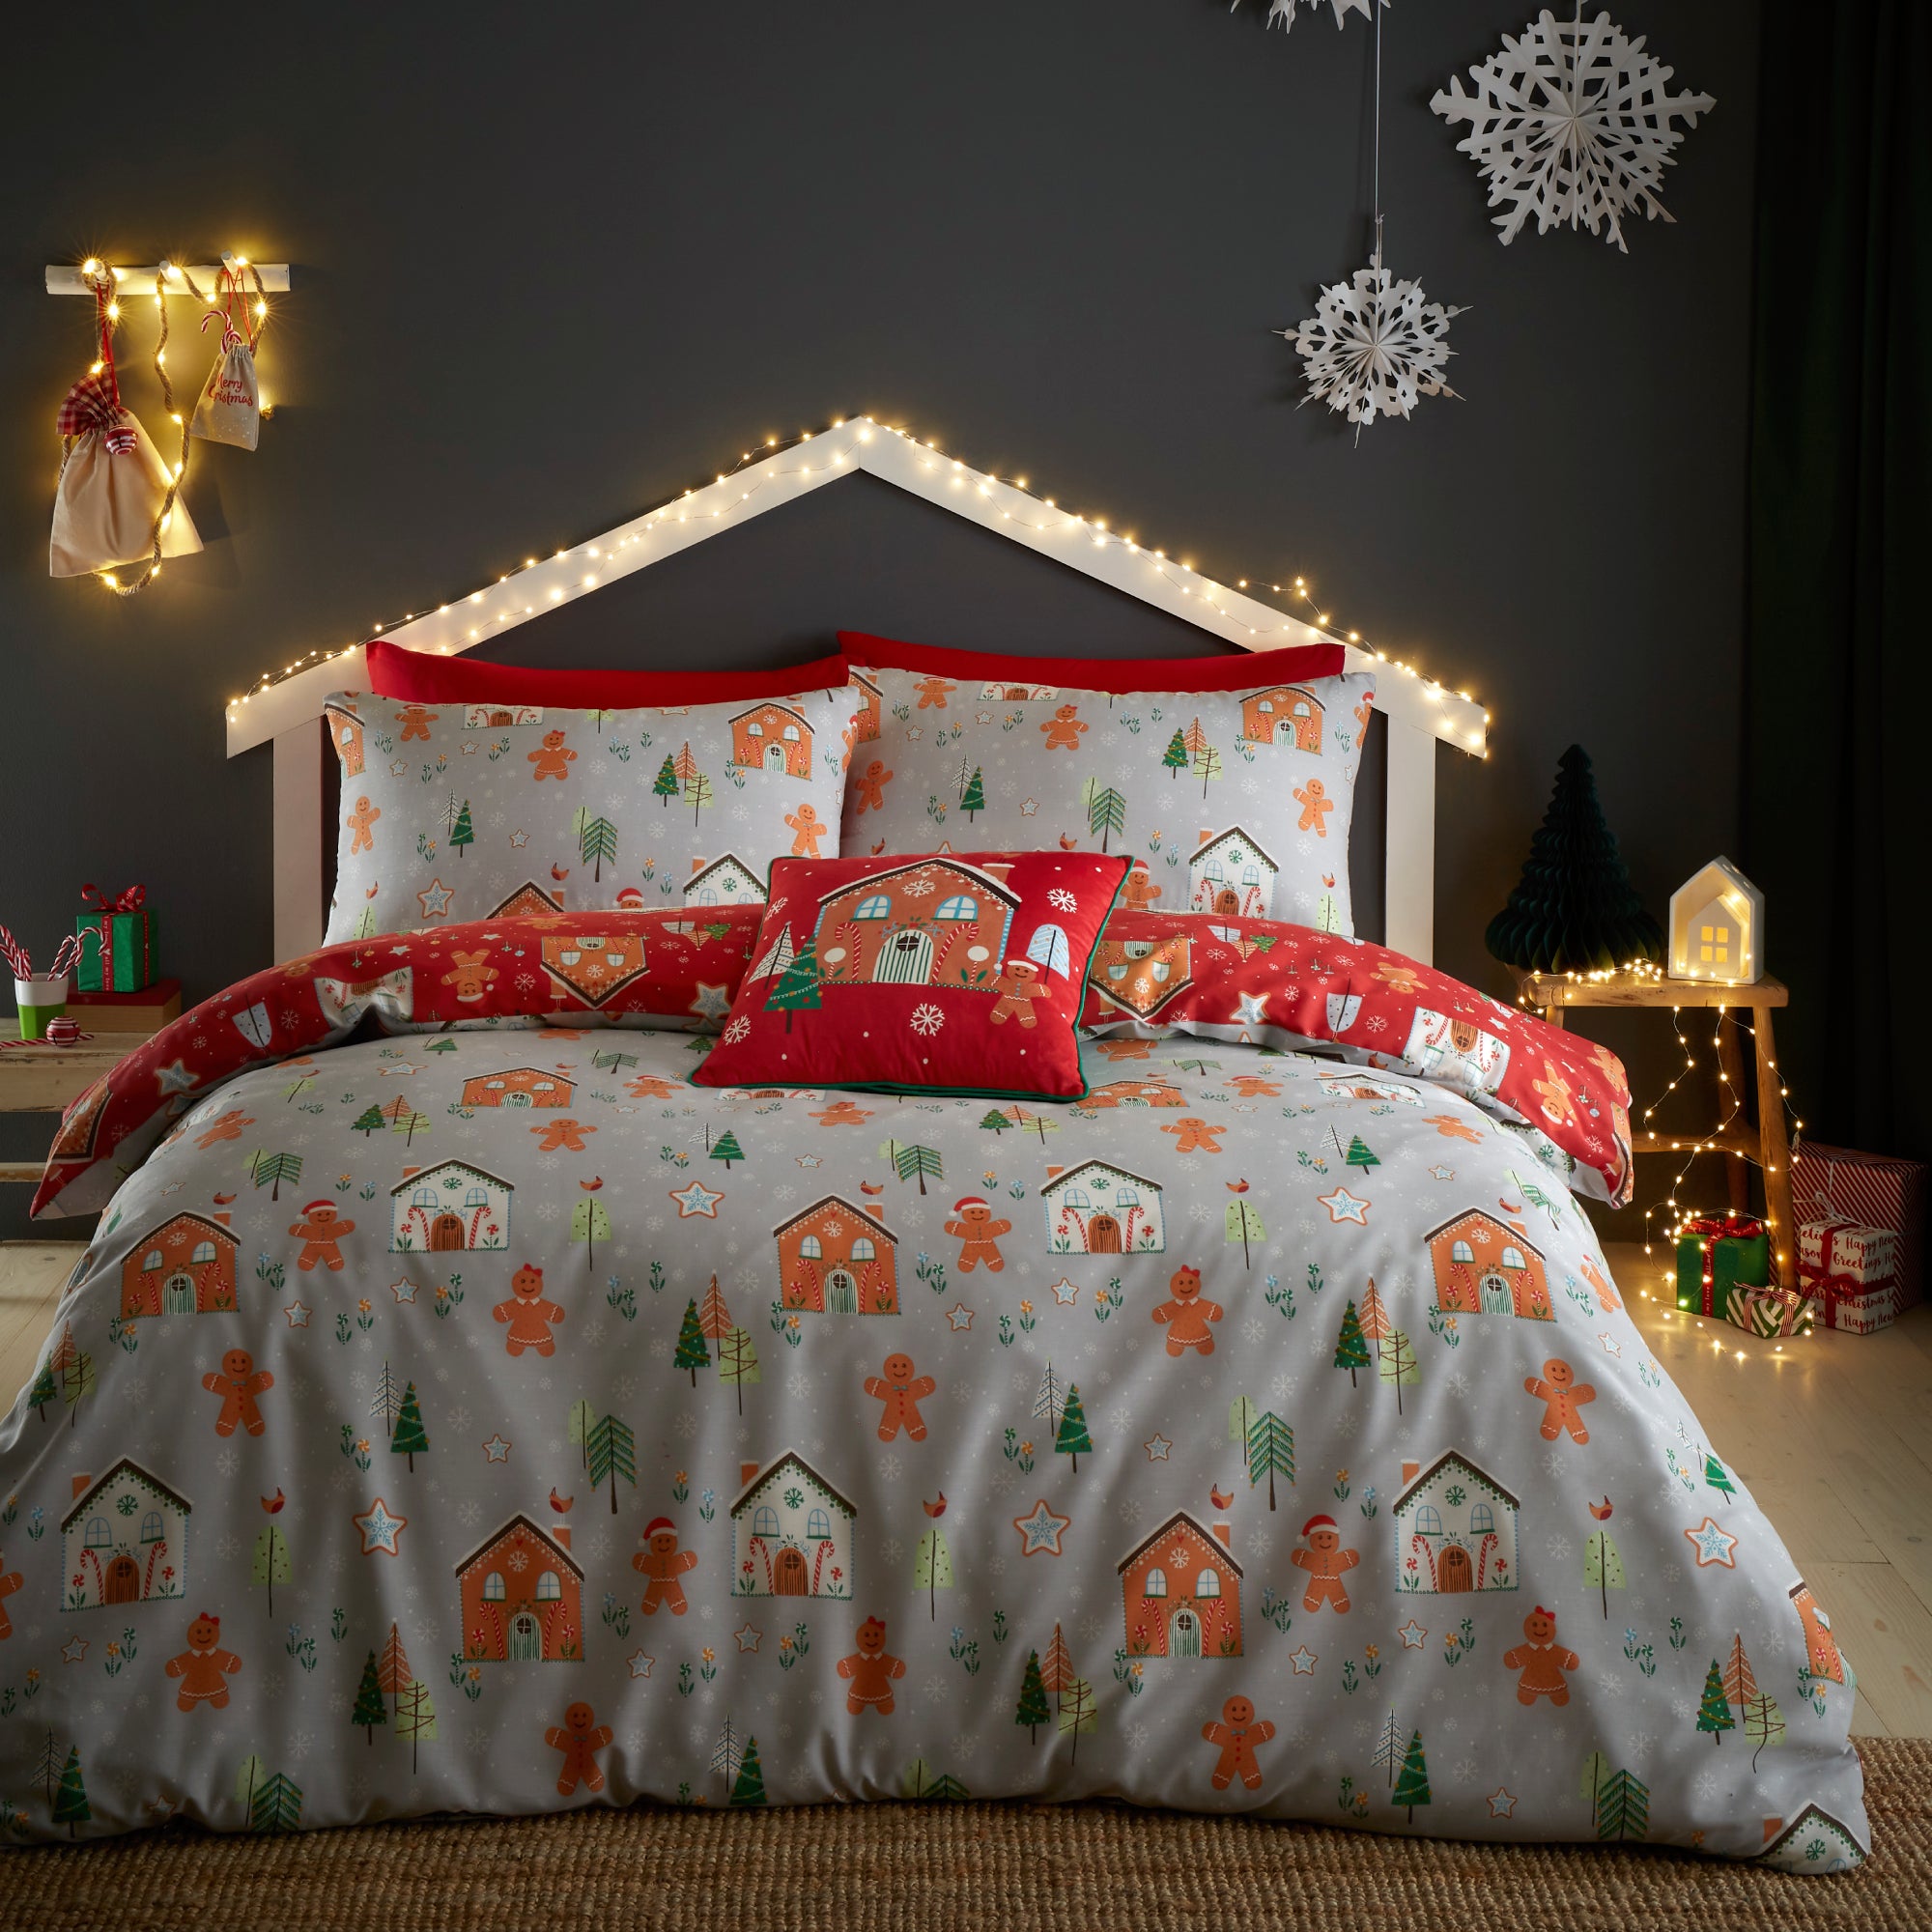 Duvet Cover Set Gingerbread House by Bedlam Christmas in Grey